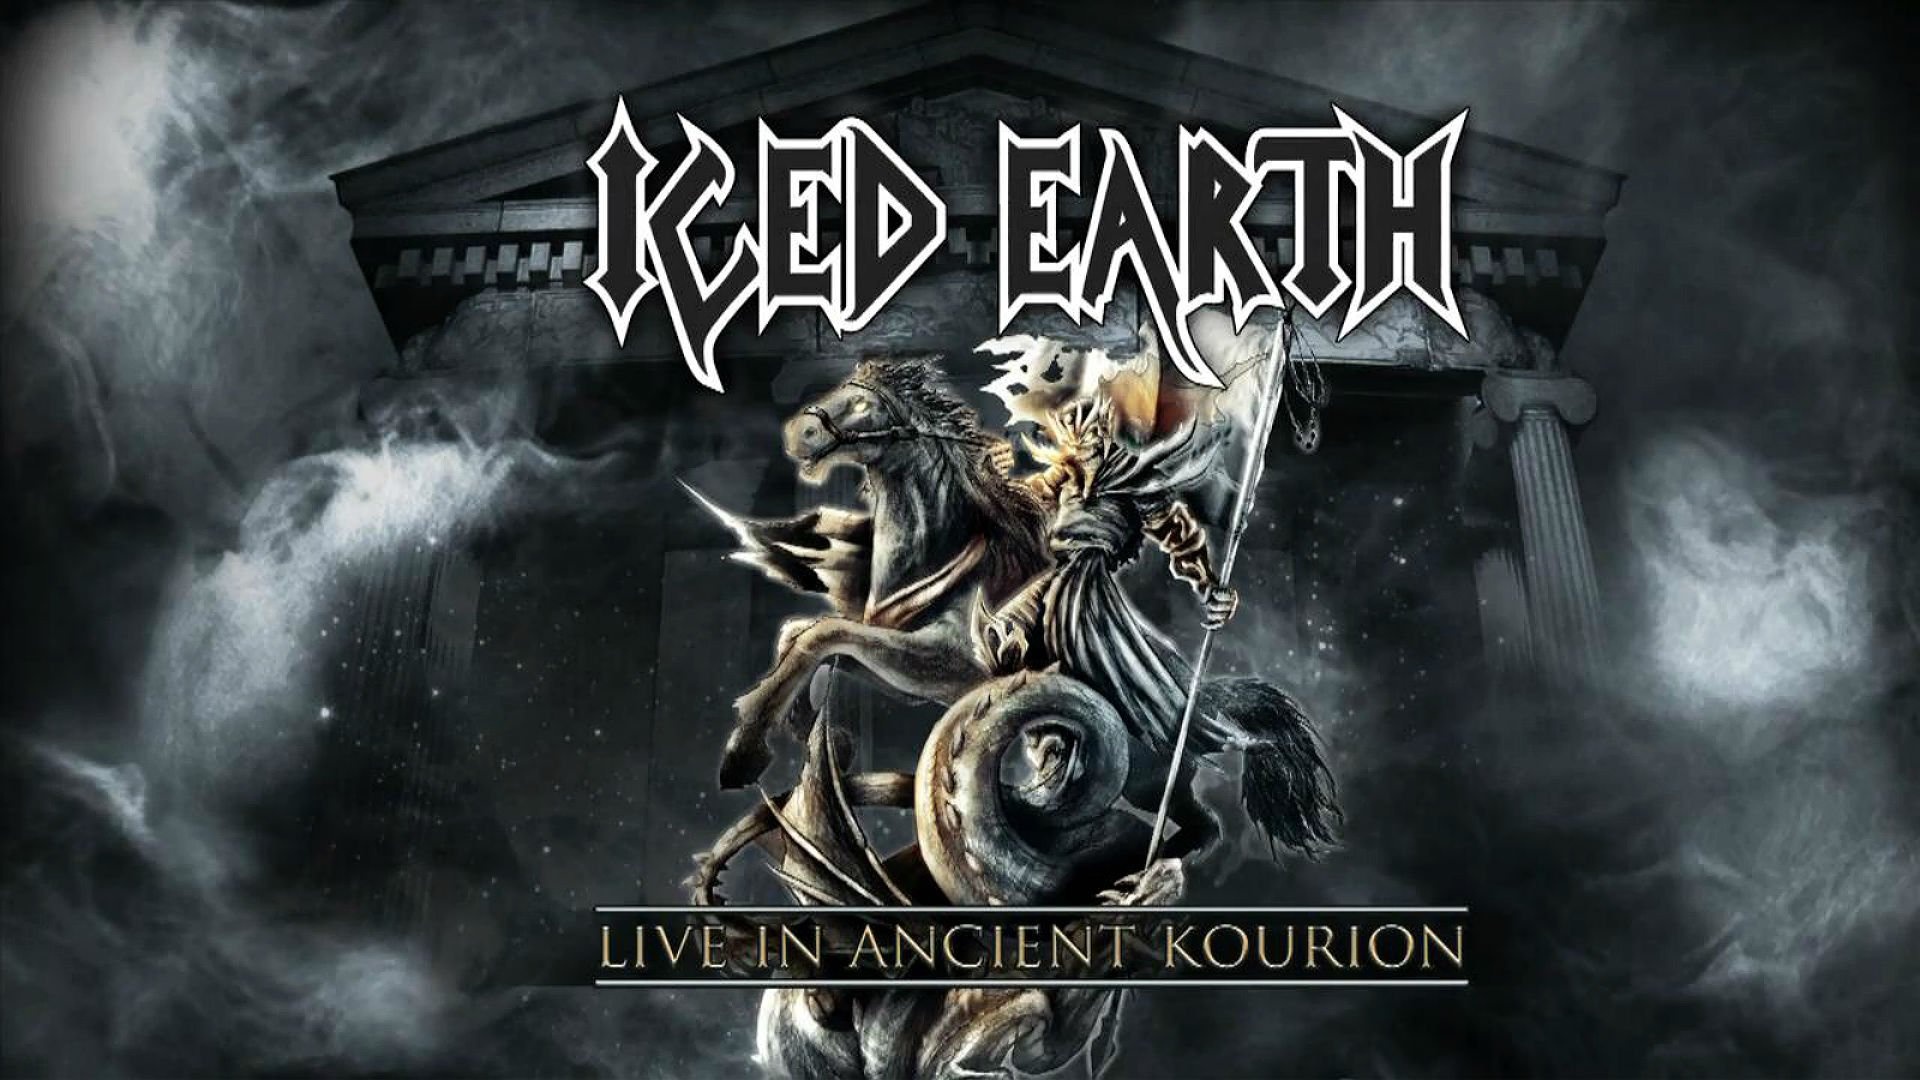 Live in Ancient Kourion, Iced Earth (Band) Wallpaper, 1920x1080 Full HD Desktop